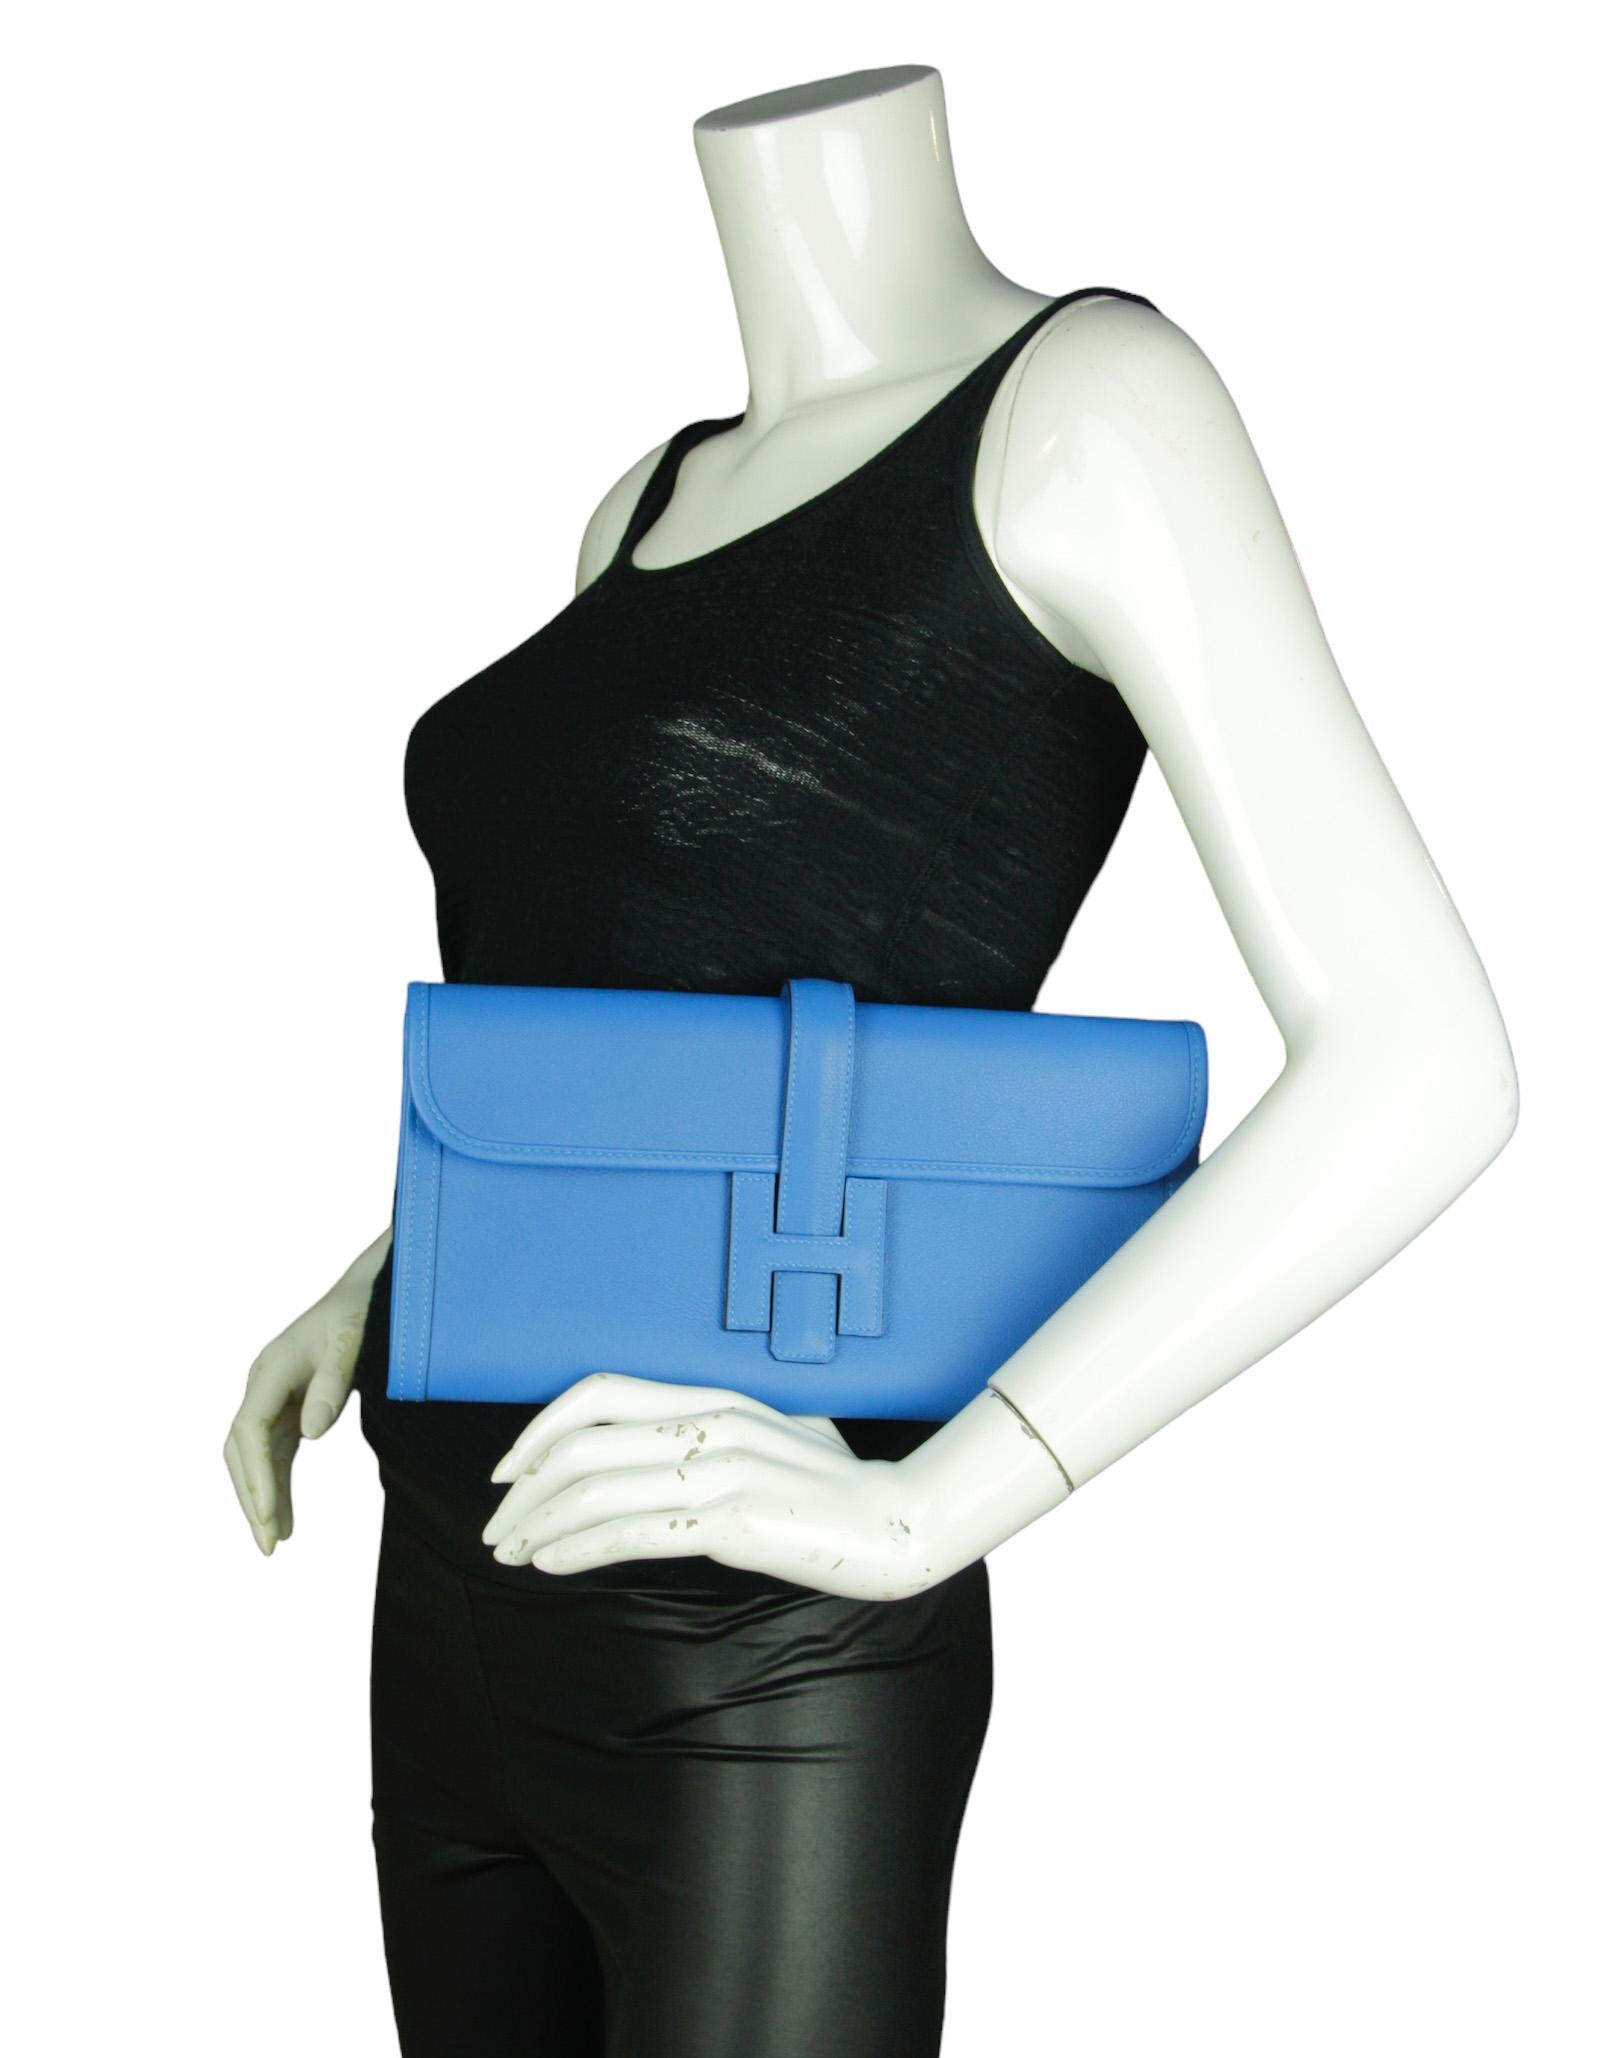 Hermes Blue Swift Leather Jige Elan Clutch Bag

Made In: France
Year of Production: 2020
Color: Bleu Frida Blue
Materials: Swift leather
Lining: Smooth leather
Closure/Opening: Flap top w/slide strap through H
Exterior Condition: Excellent
Interior